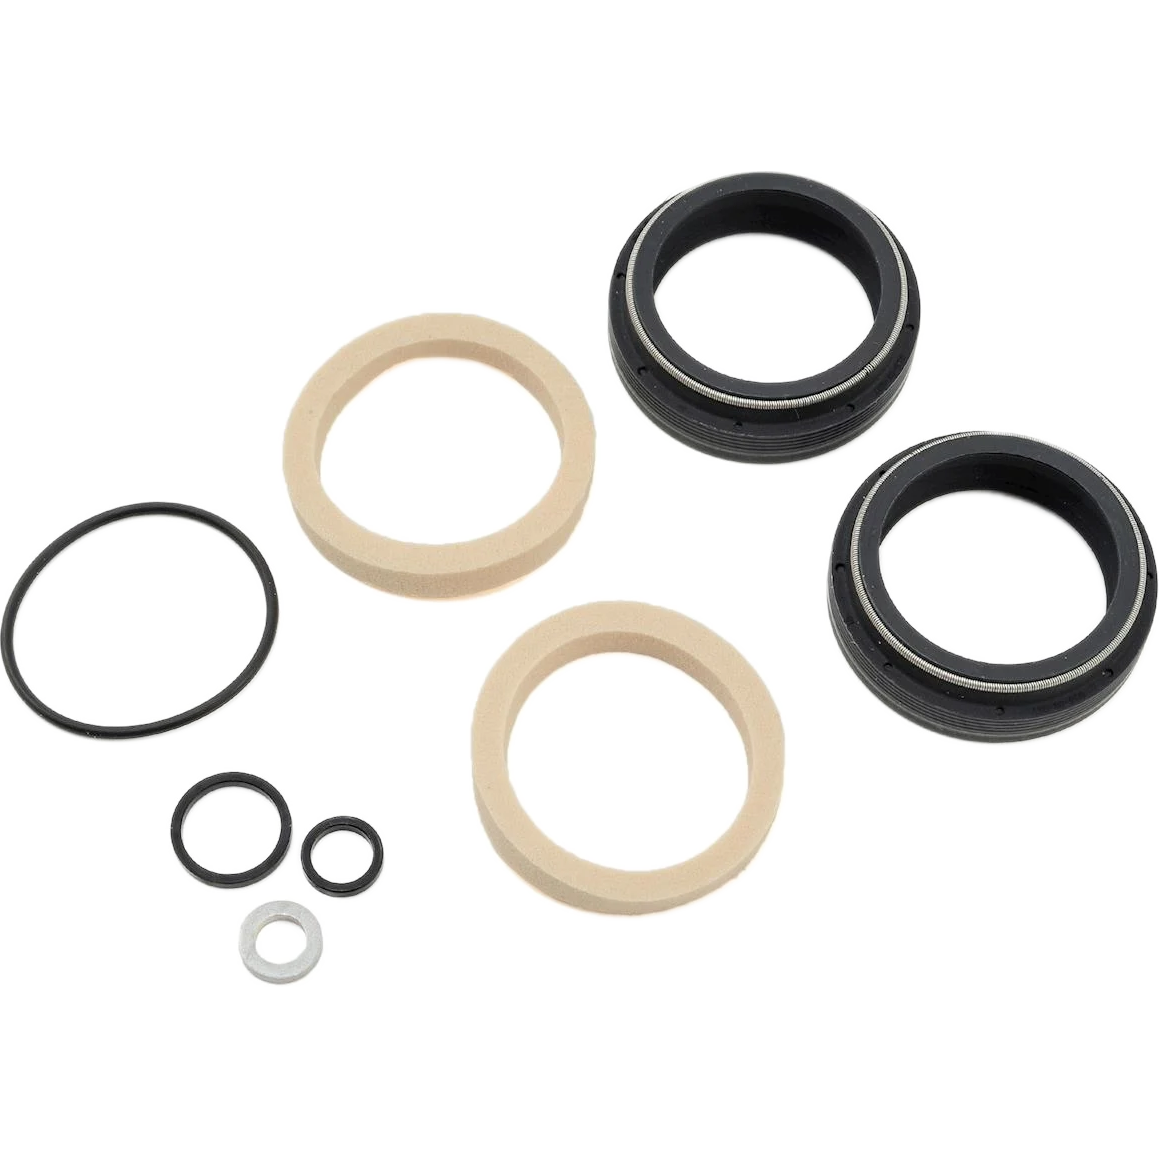 Low Friction Dust Wiper Kit - 34mm Forx, No Flange alternate view